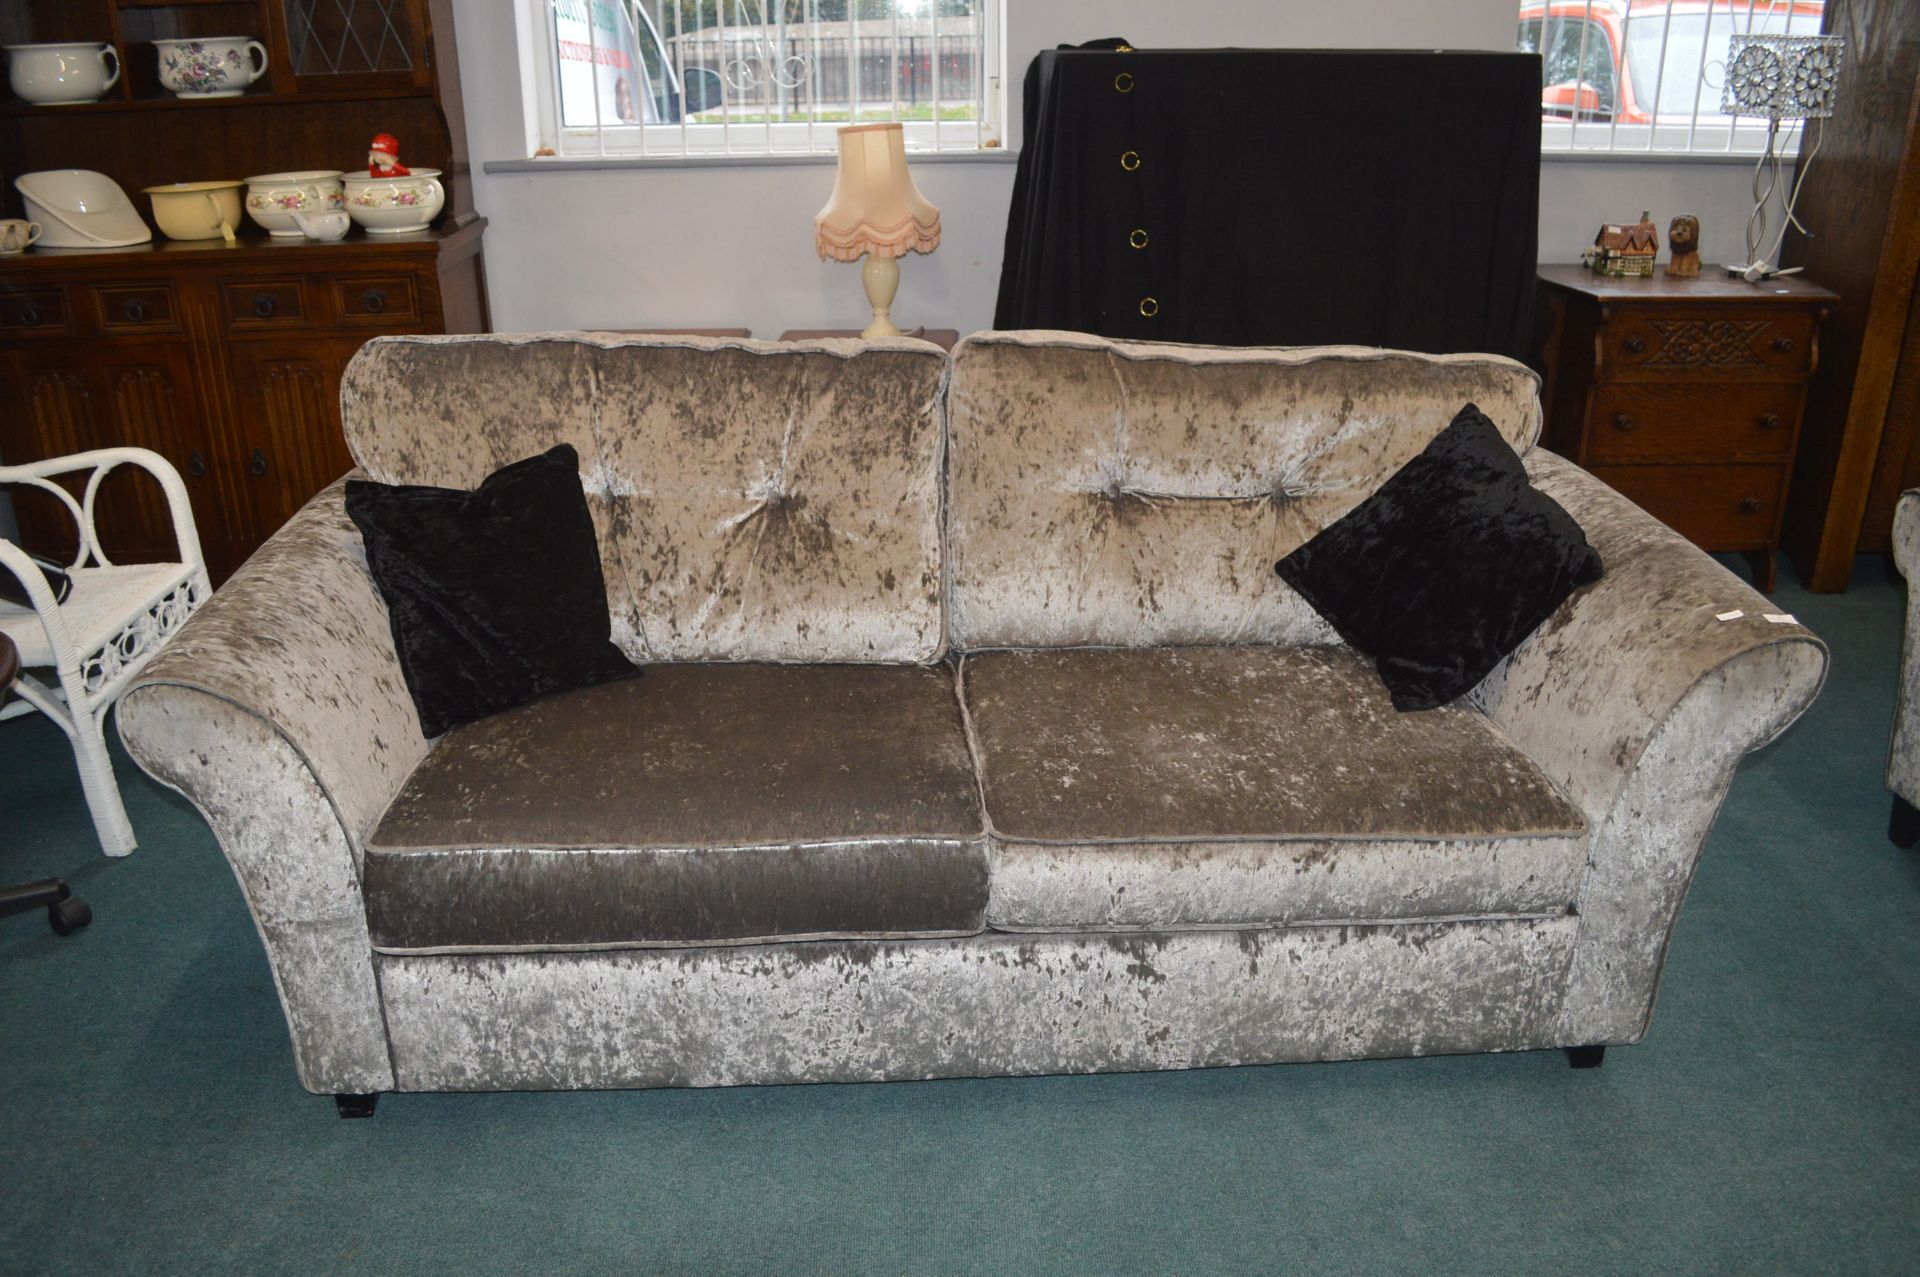 DFS Double Sofa Bed with Grey Plush Upholstery